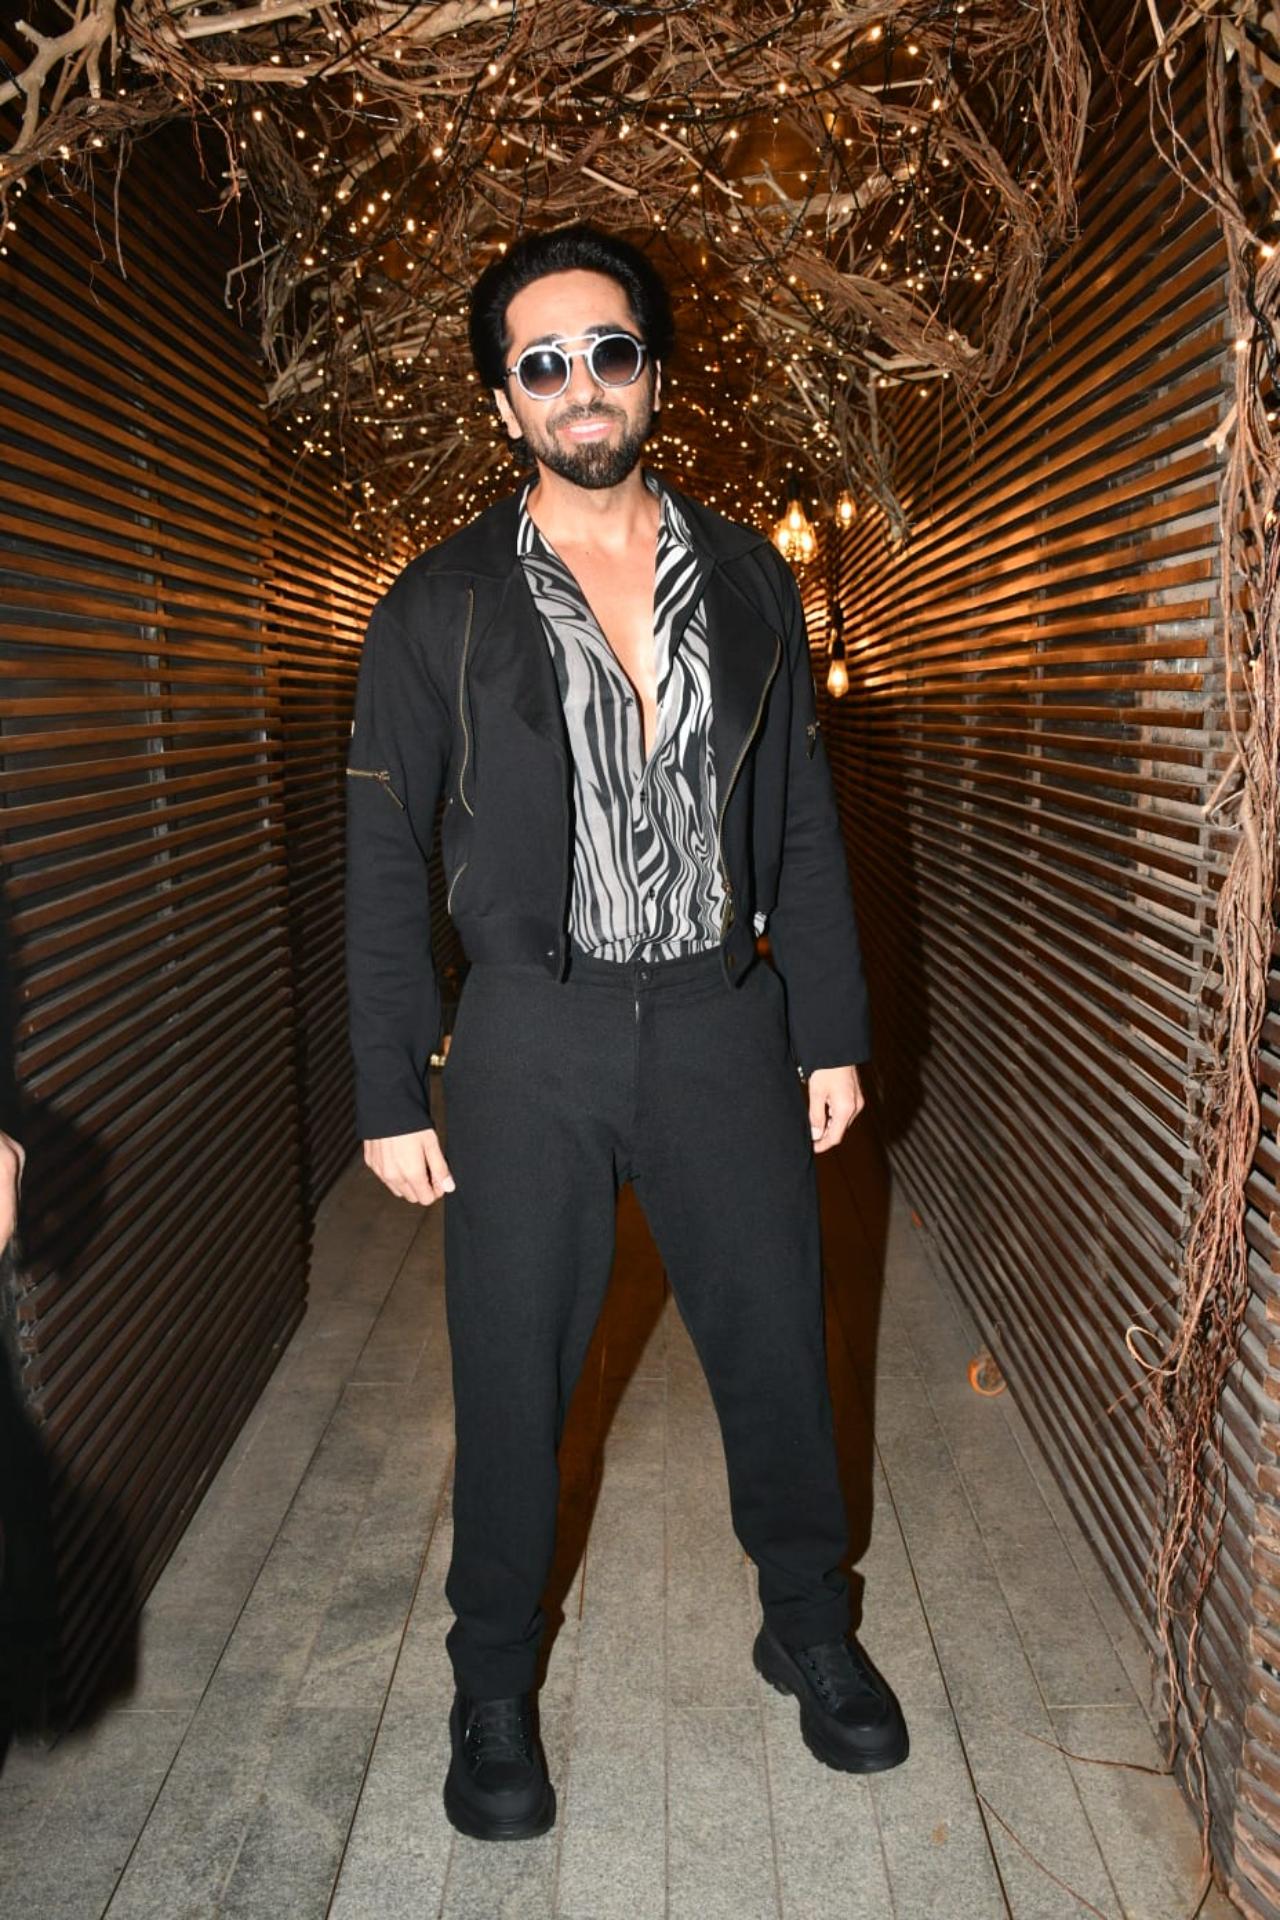 Ayushmann Khurrana who is busy promoting his upcoming film 'An Action Hero' was seen looking no less a hero in all black suit and funky glasses